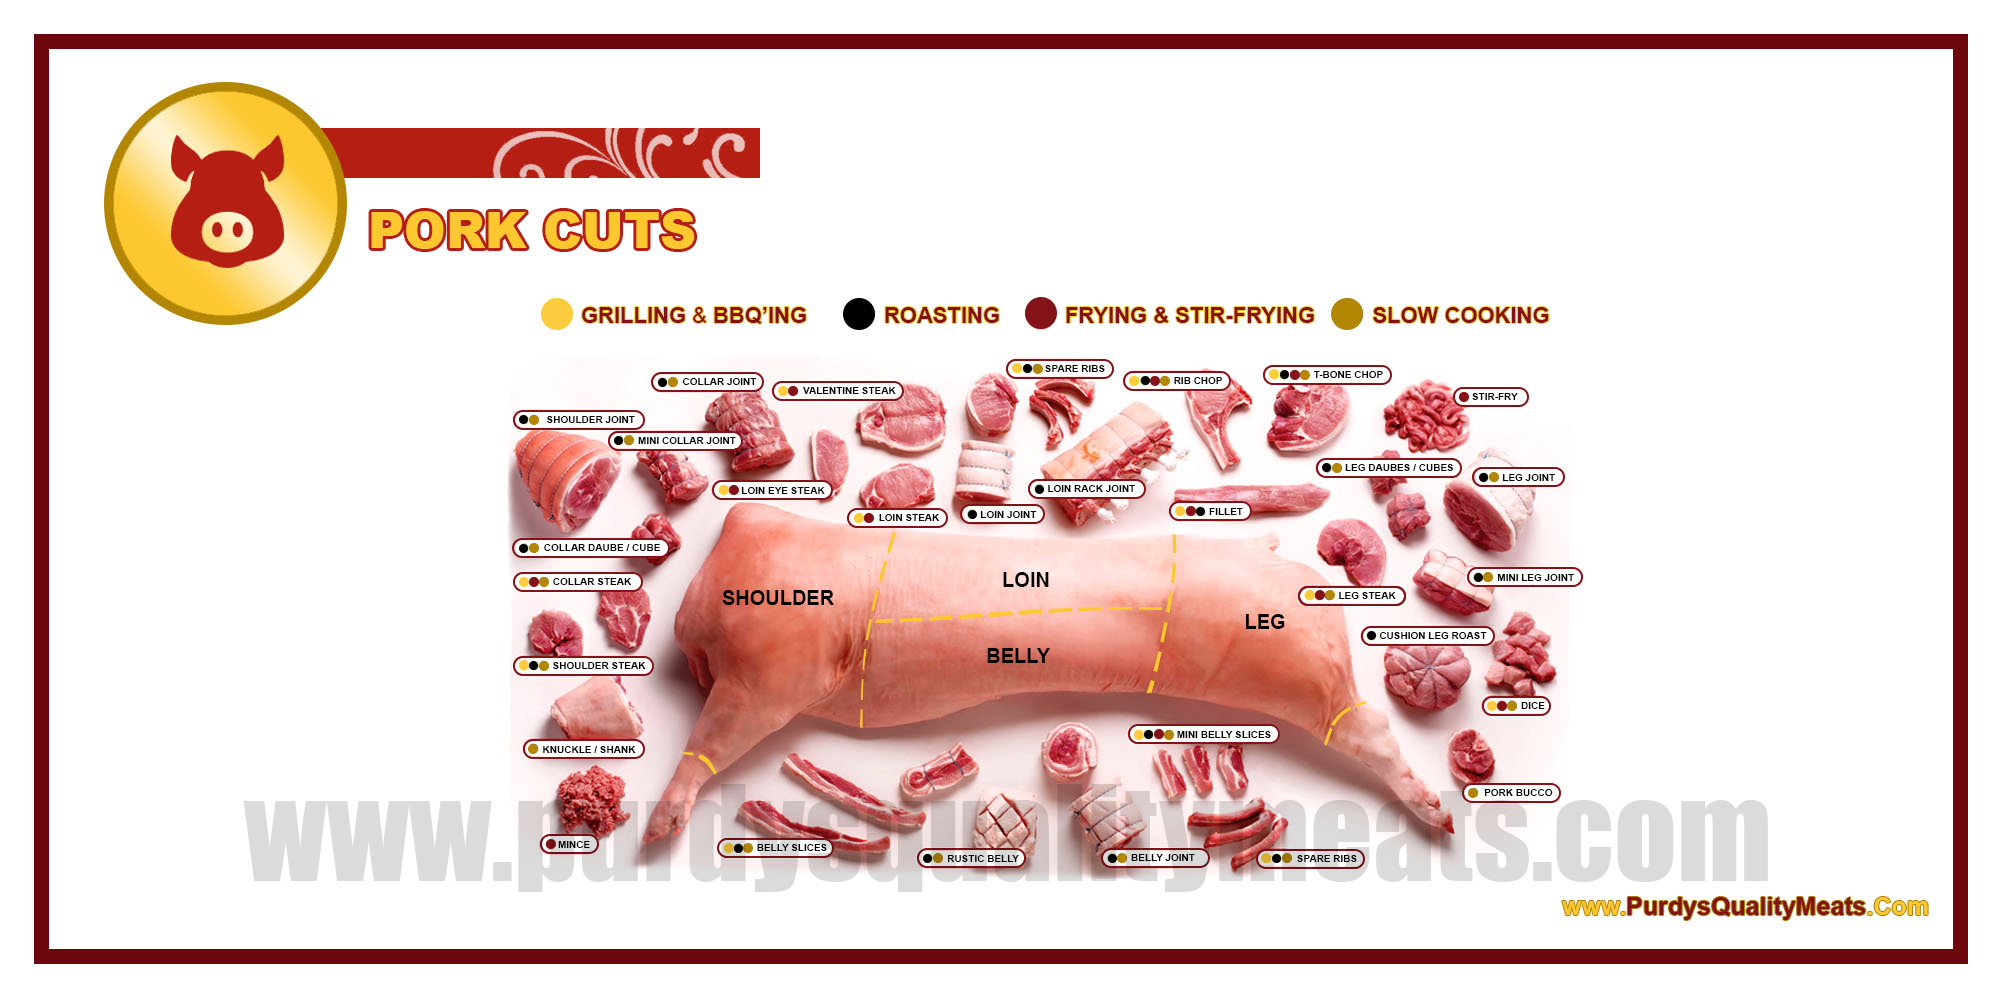 This image icon displays the Purdy's Quality Meats Pork Cuts image